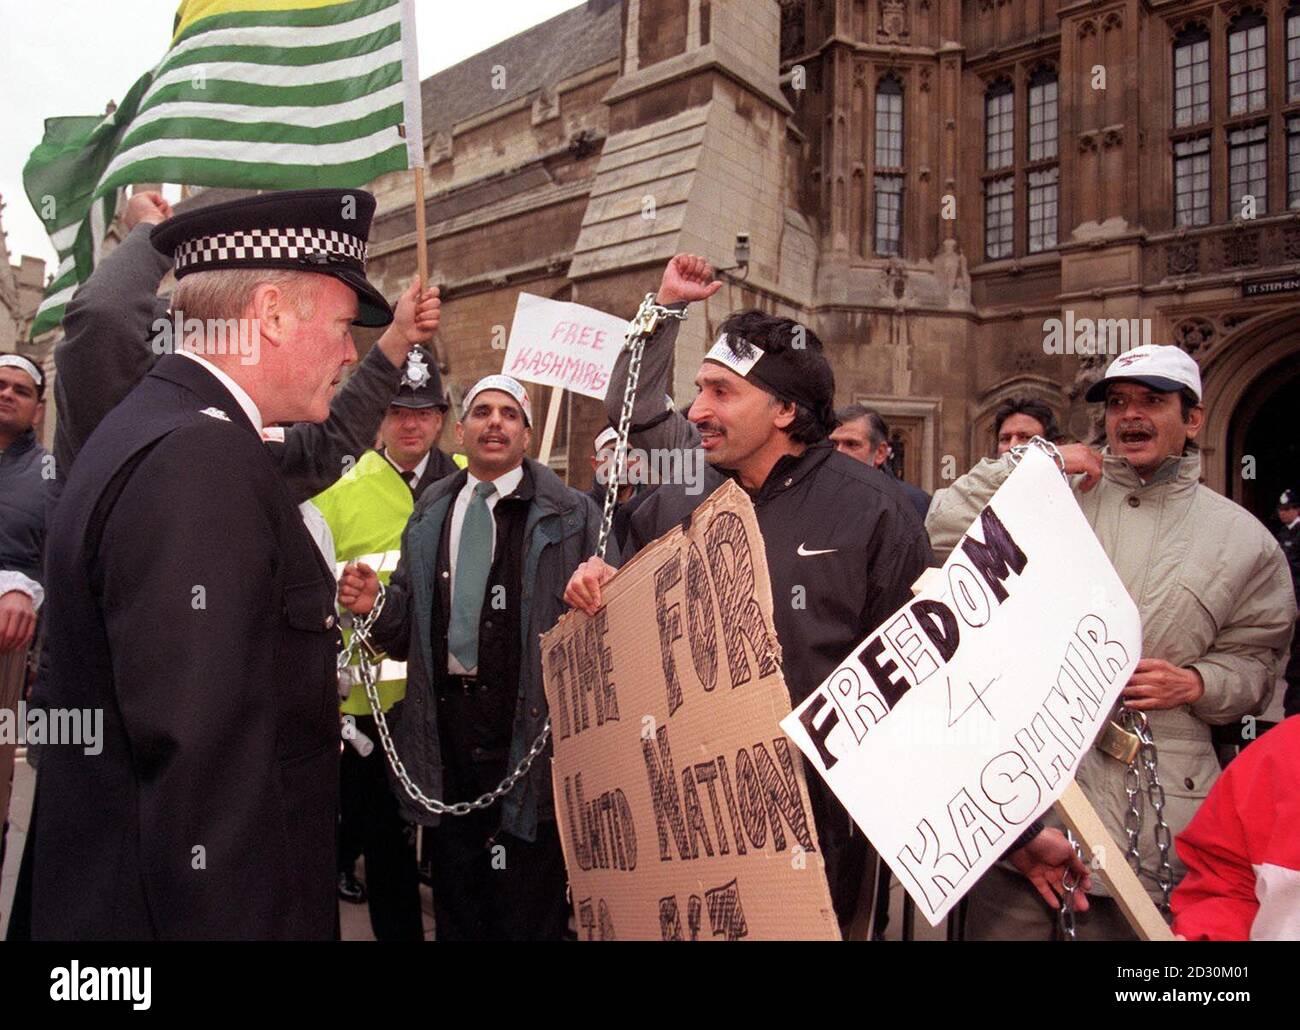 A group of around 15 Kashmiri protesters who chained themselves to the railings outside the House of Commons, in order to highlight the territory's treatment under Indian rule. Police cut the protesters free and moved them away from the  area.  Stock Photo